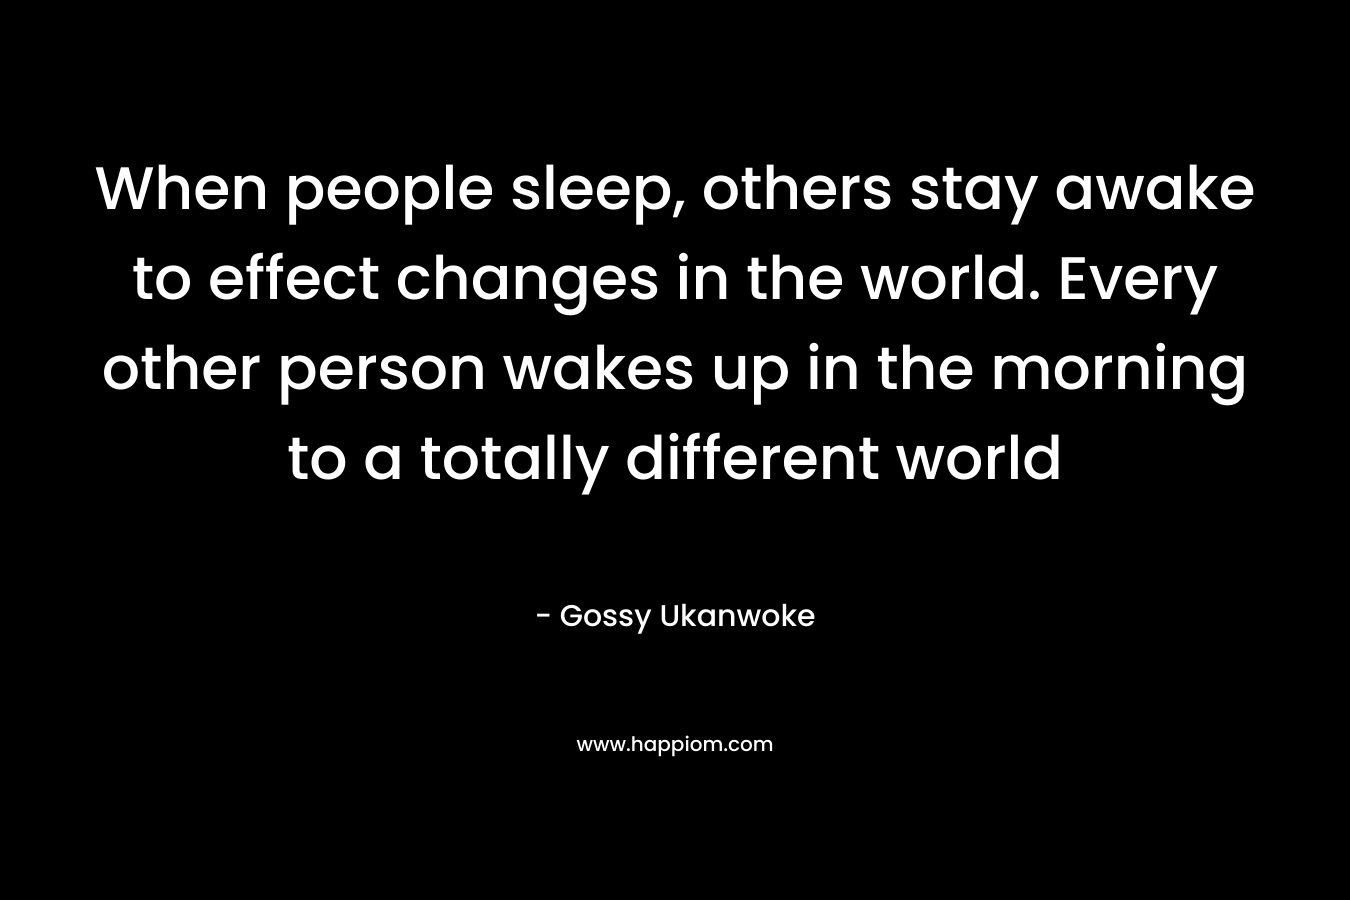 When people sleep, others stay awake to effect changes in the world. Every other person wakes up in the morning to a totally different world